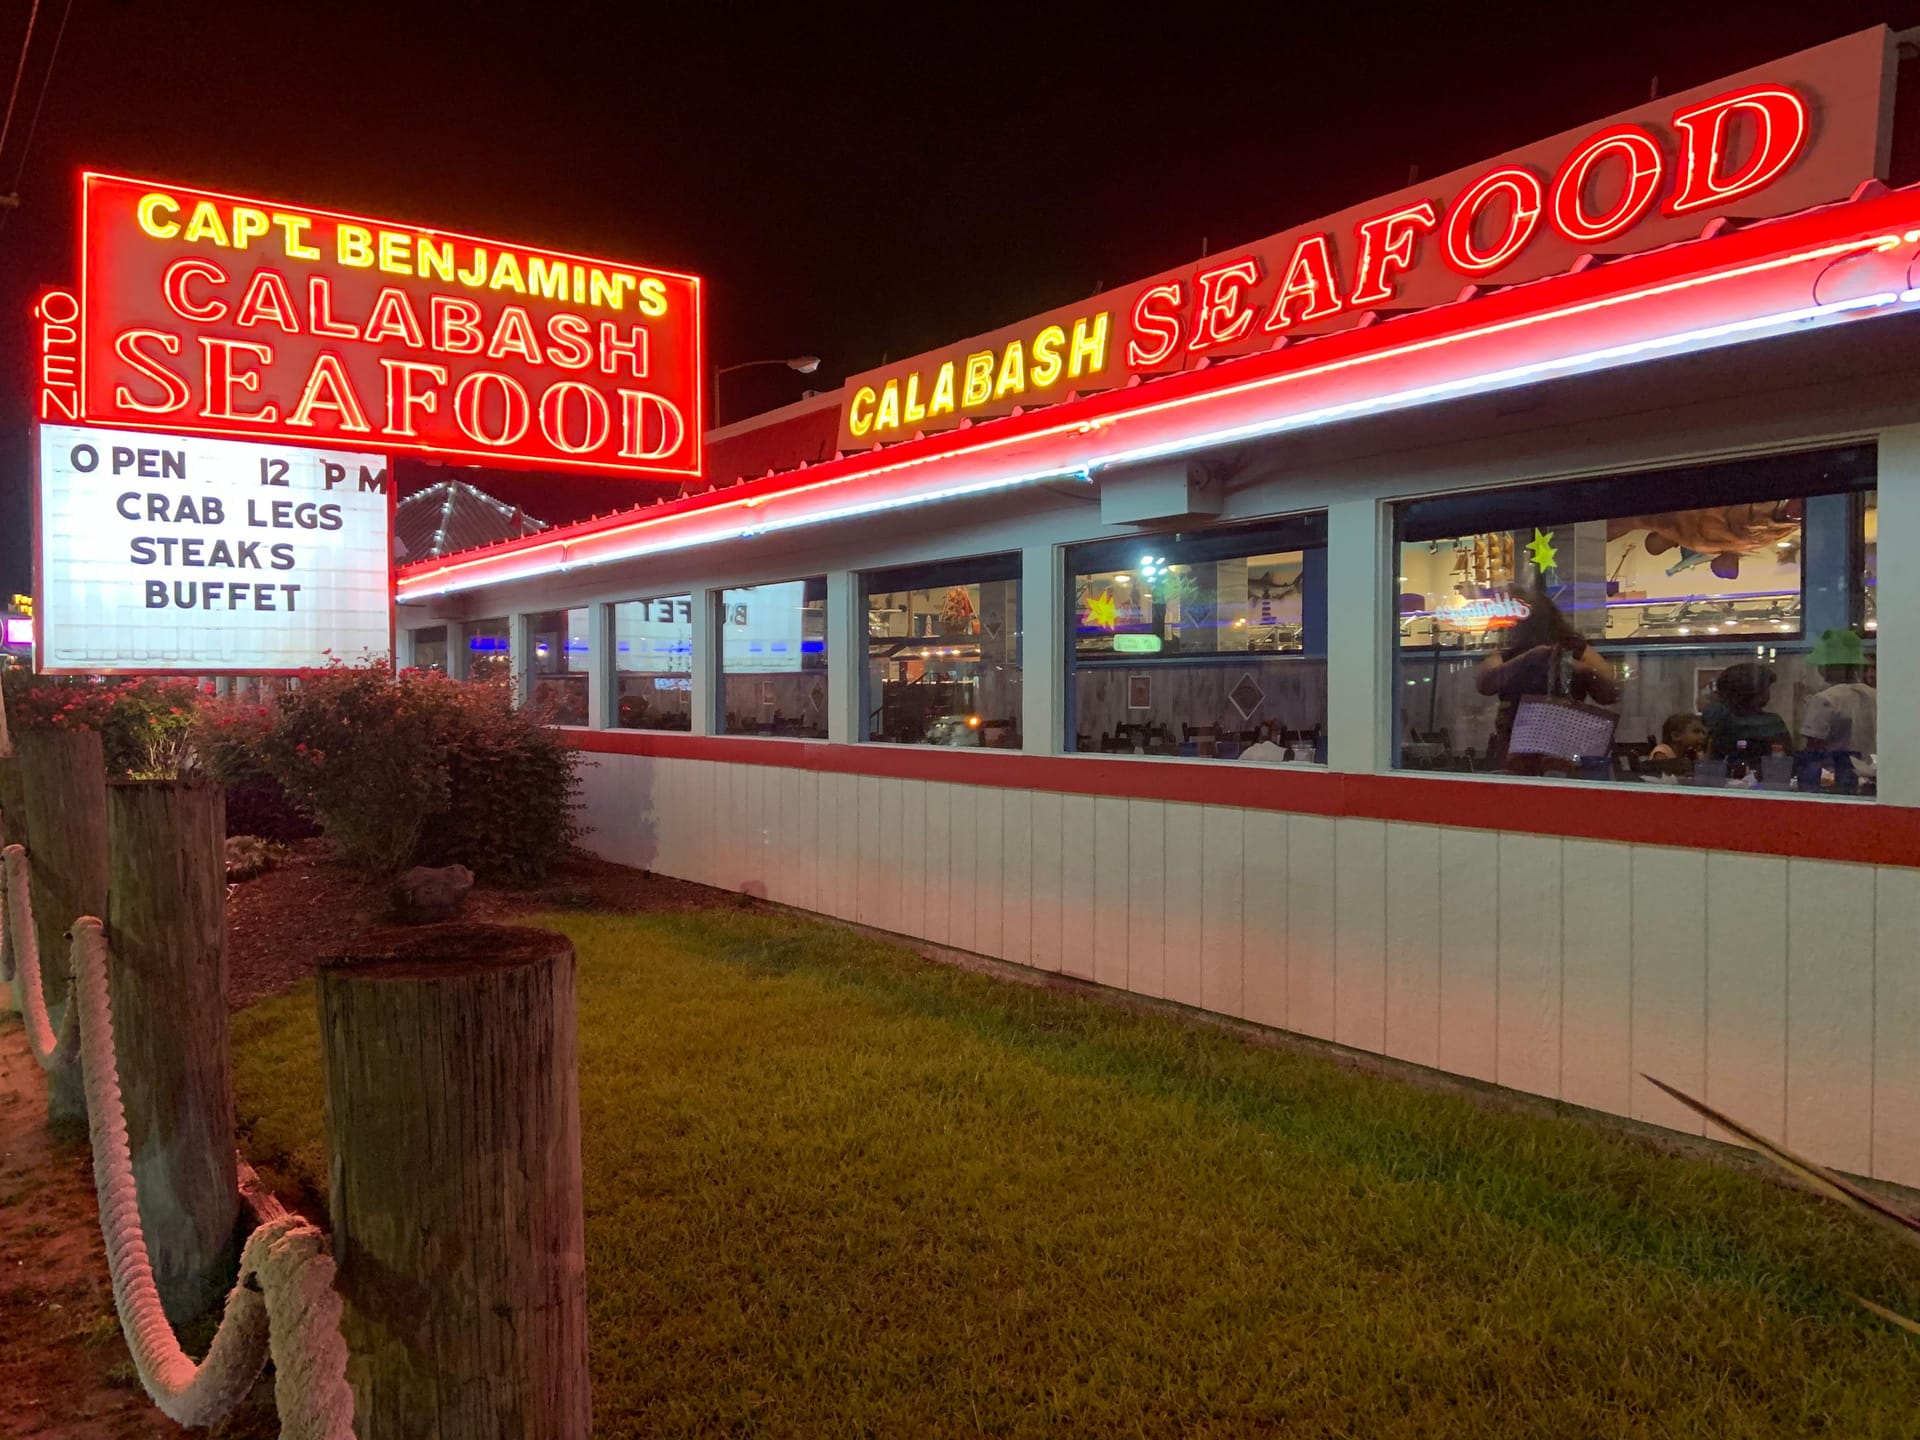 Seafood satt: All you can eat Buffet in Myrtle Beach.